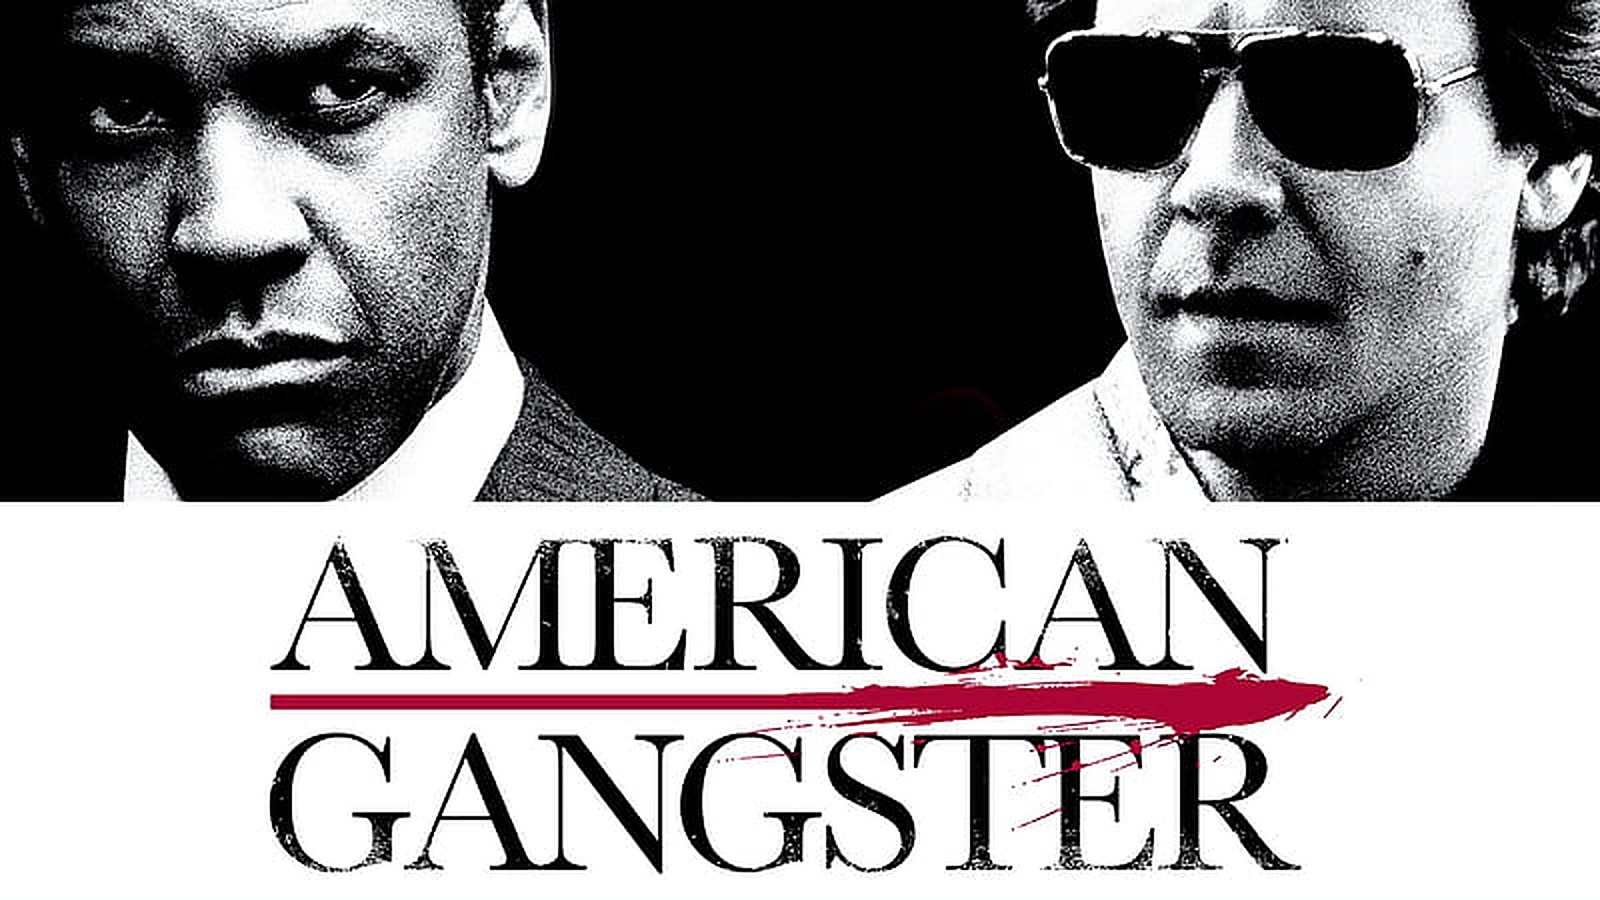 39-facts-about-the-movie-american-gangster